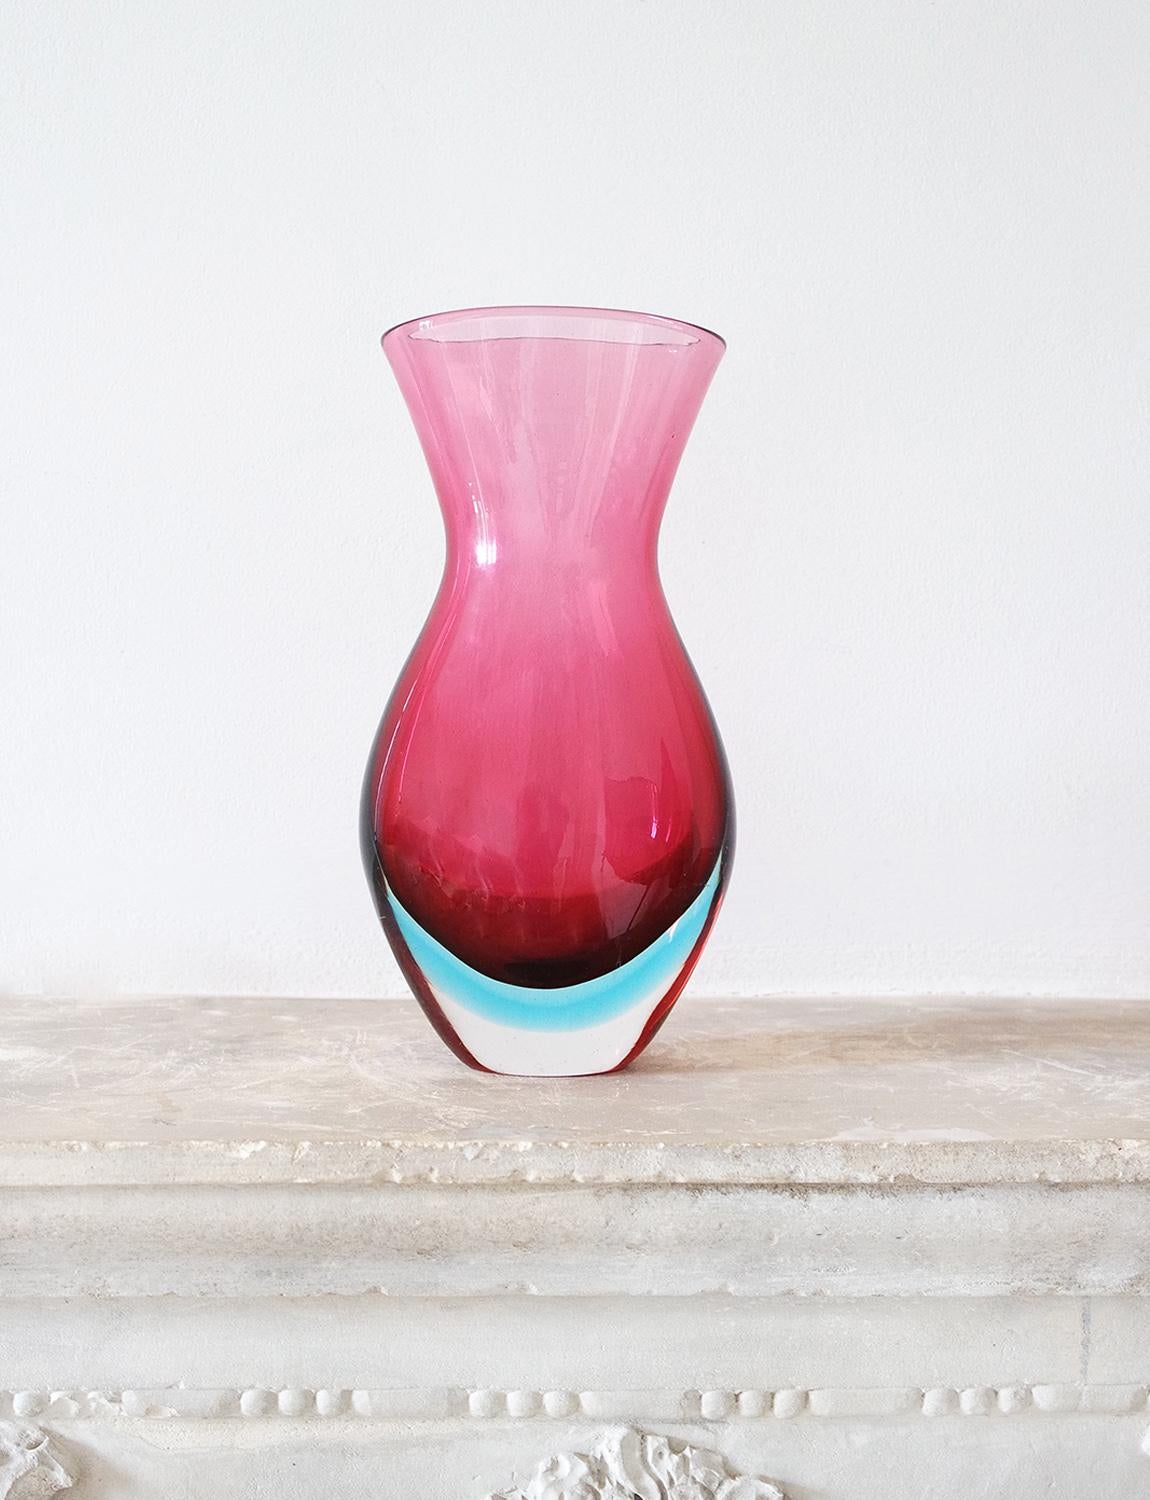 Wonderful very large heavy based pink Italian 'sommerso' vase found in Milan. This 1950s hand-blown Murano glass collectors piece is pink glass submerged with a line of aqua and ensconced in a clear glass base. It has a wonderful form and size and